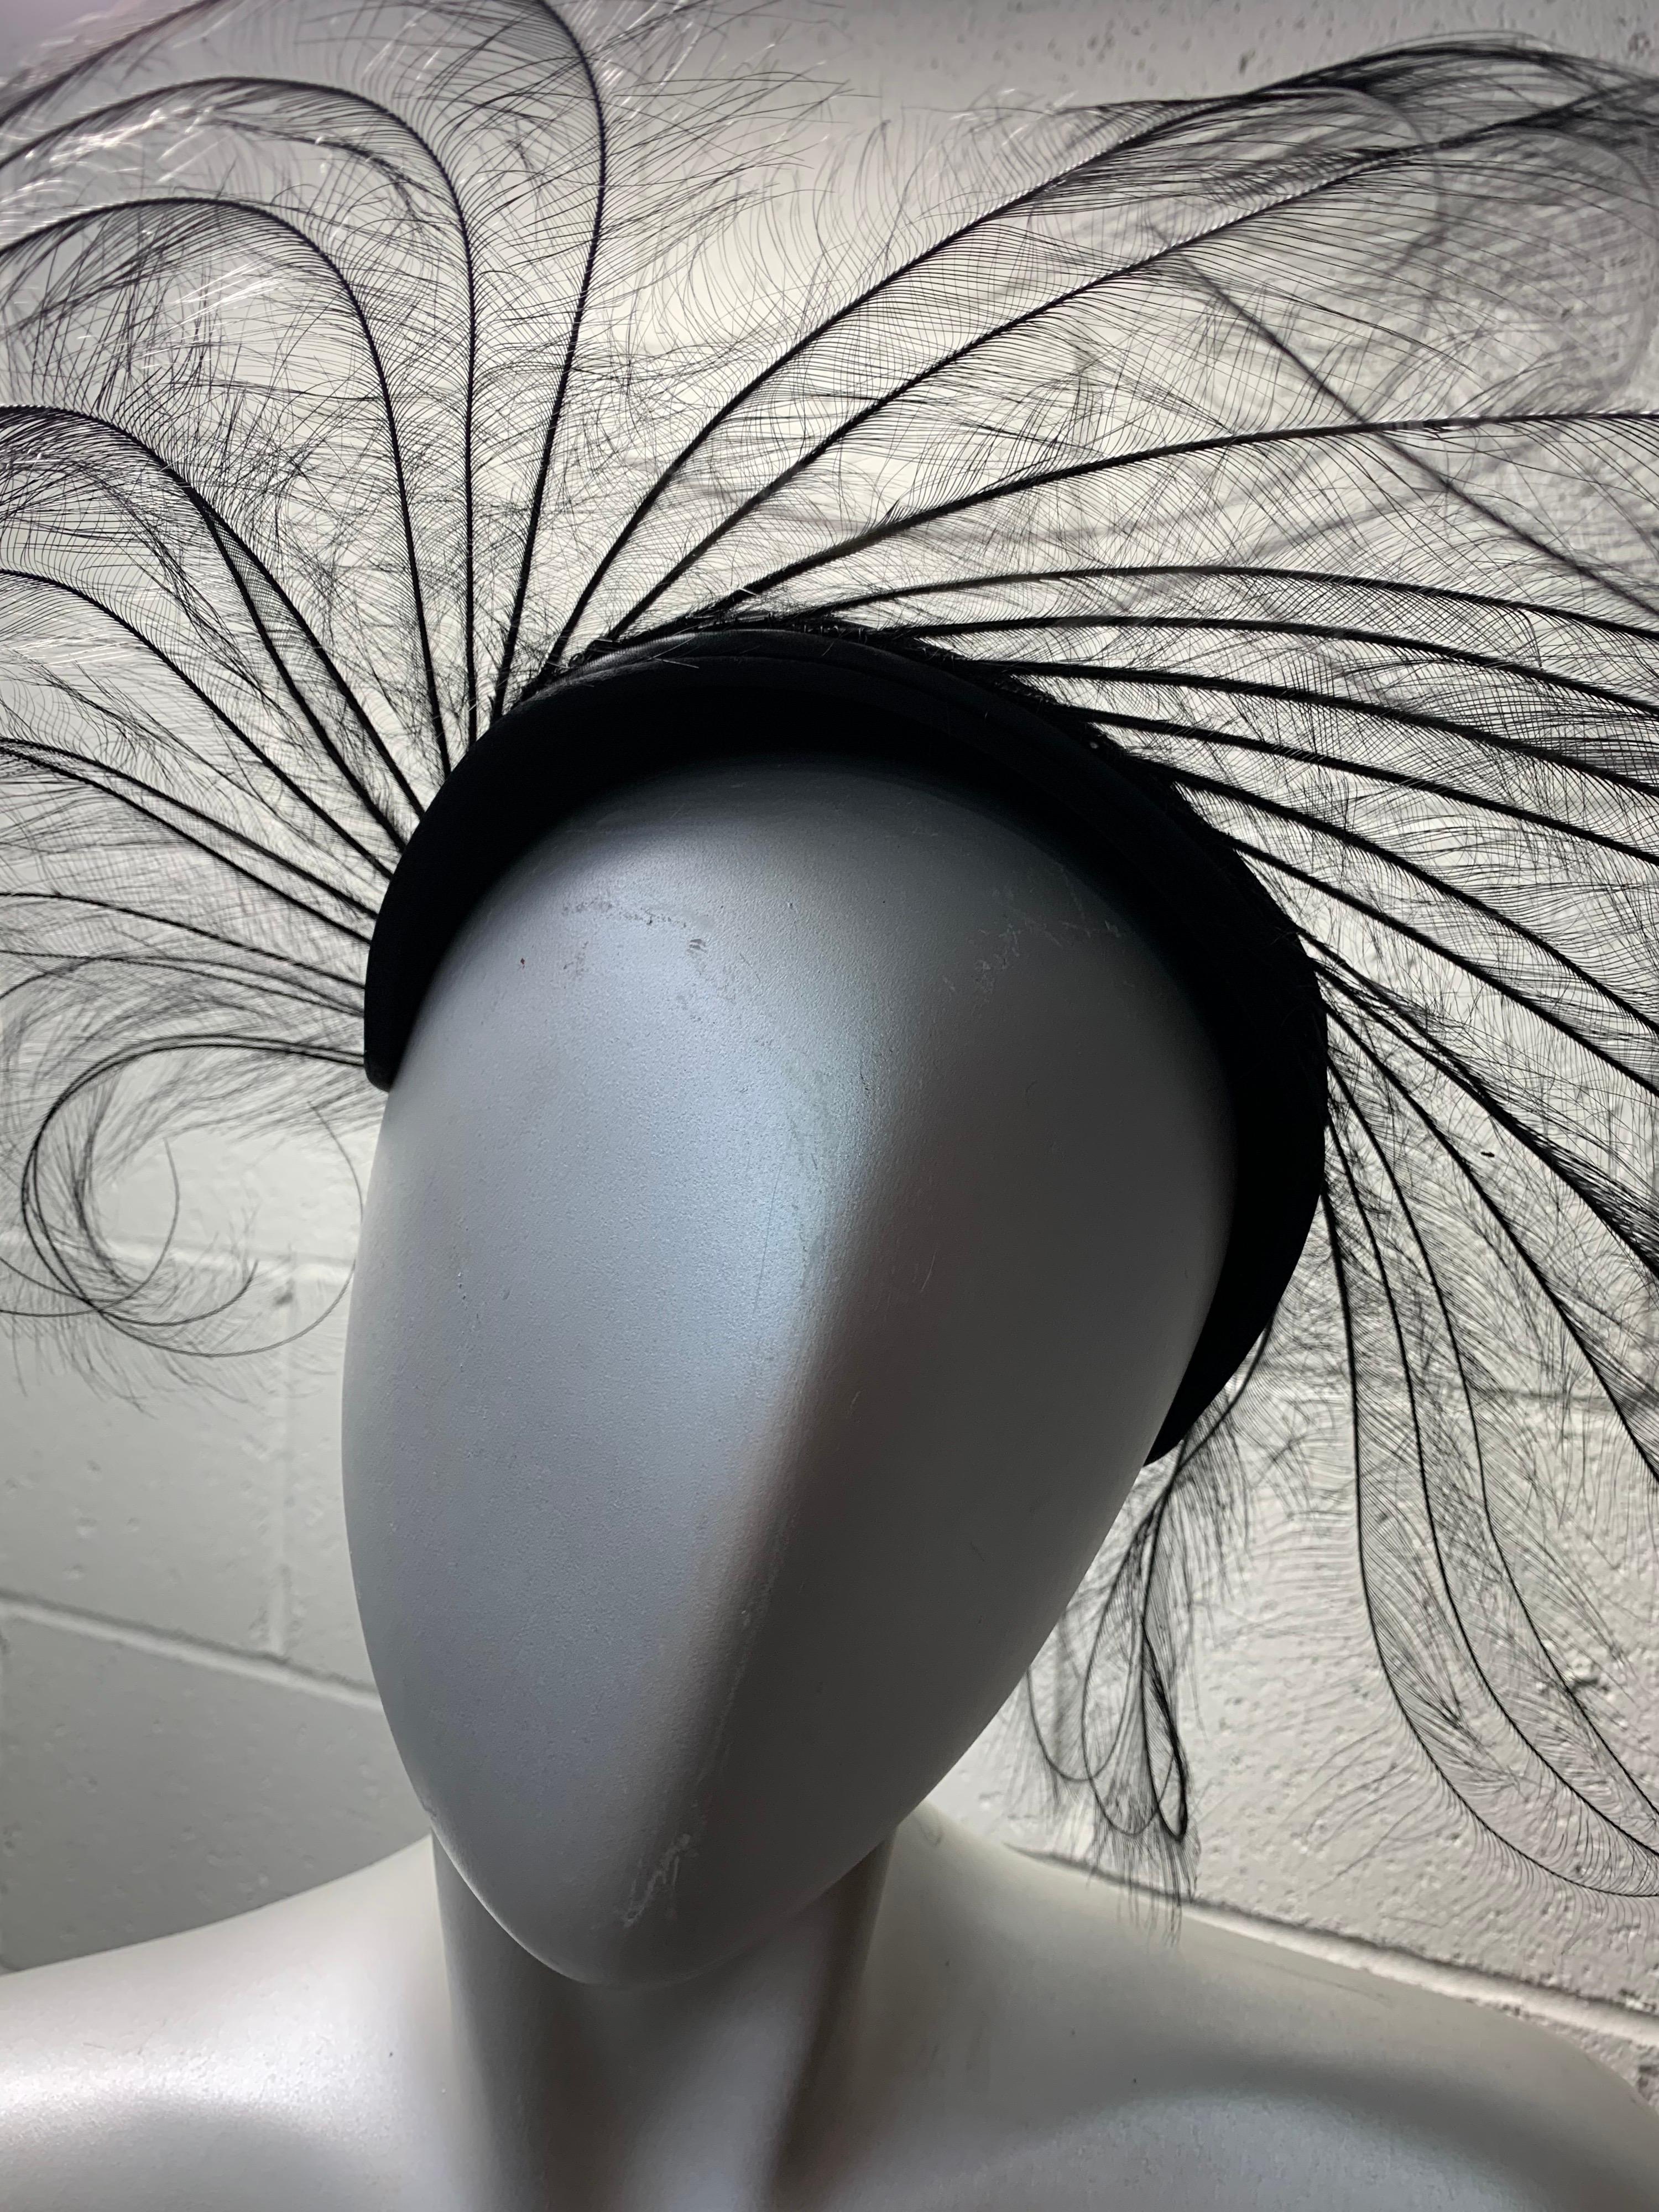 1950s Flo-Raye Black Egret Feather Cartwheel Hat w/ Velvet Structured Crown: Spiral curled feathers encircle a structured cap, jutting out to create a halo effect. One Size. 